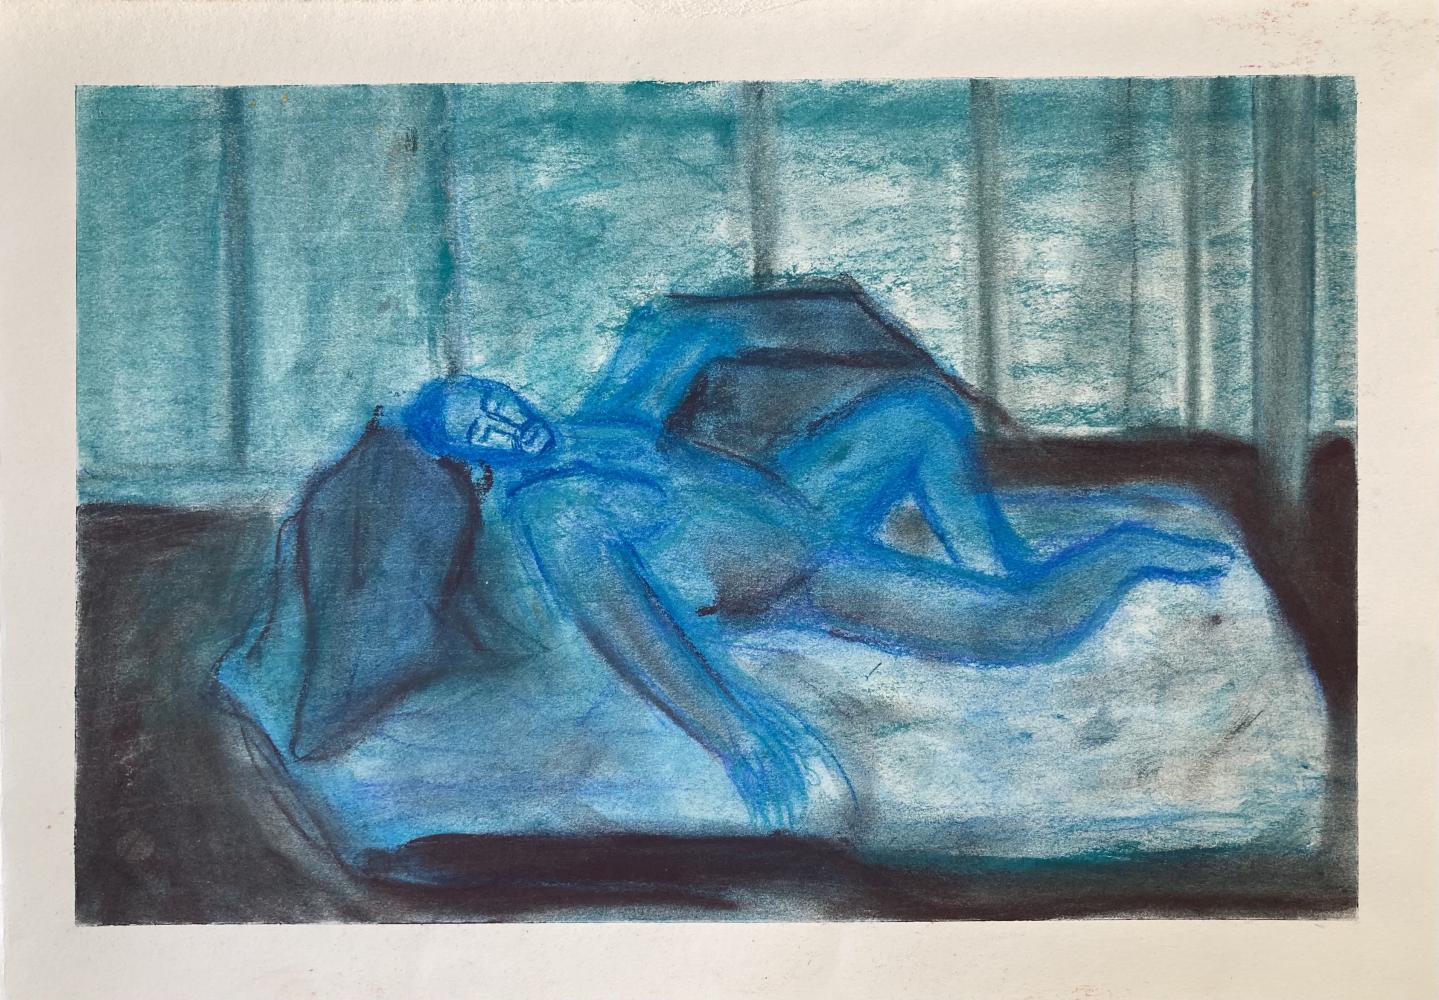 Painting of man reclining on bed